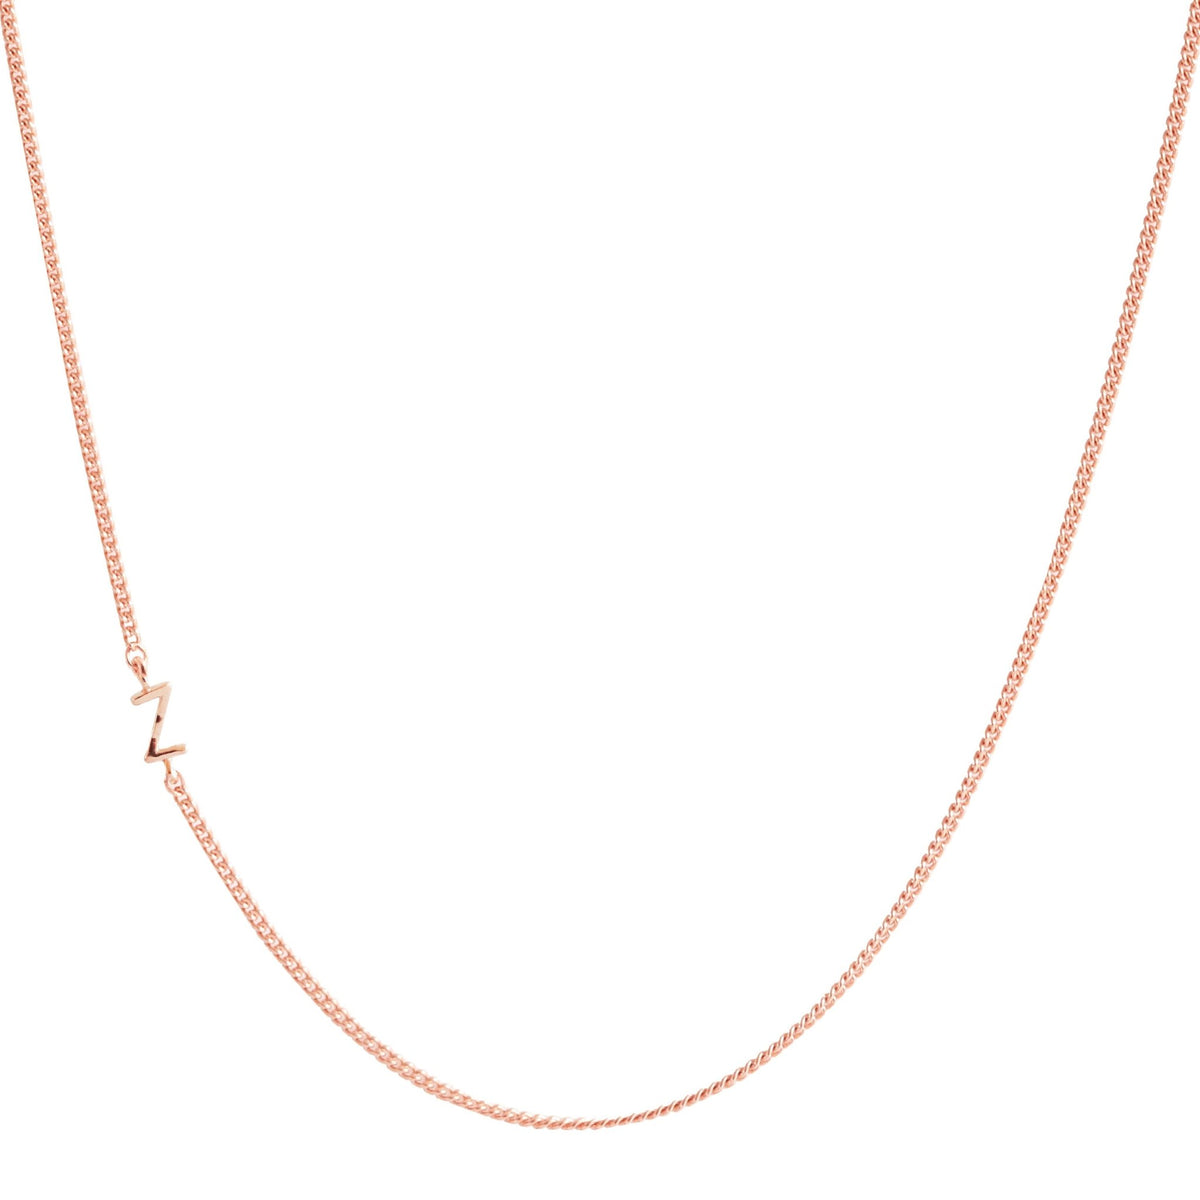 NOTABLE OFFSET INITIAL NECKLACE - Z - GOLD, ROSE GOLD, OR SILVER - SO PRETTY CARA COTTER